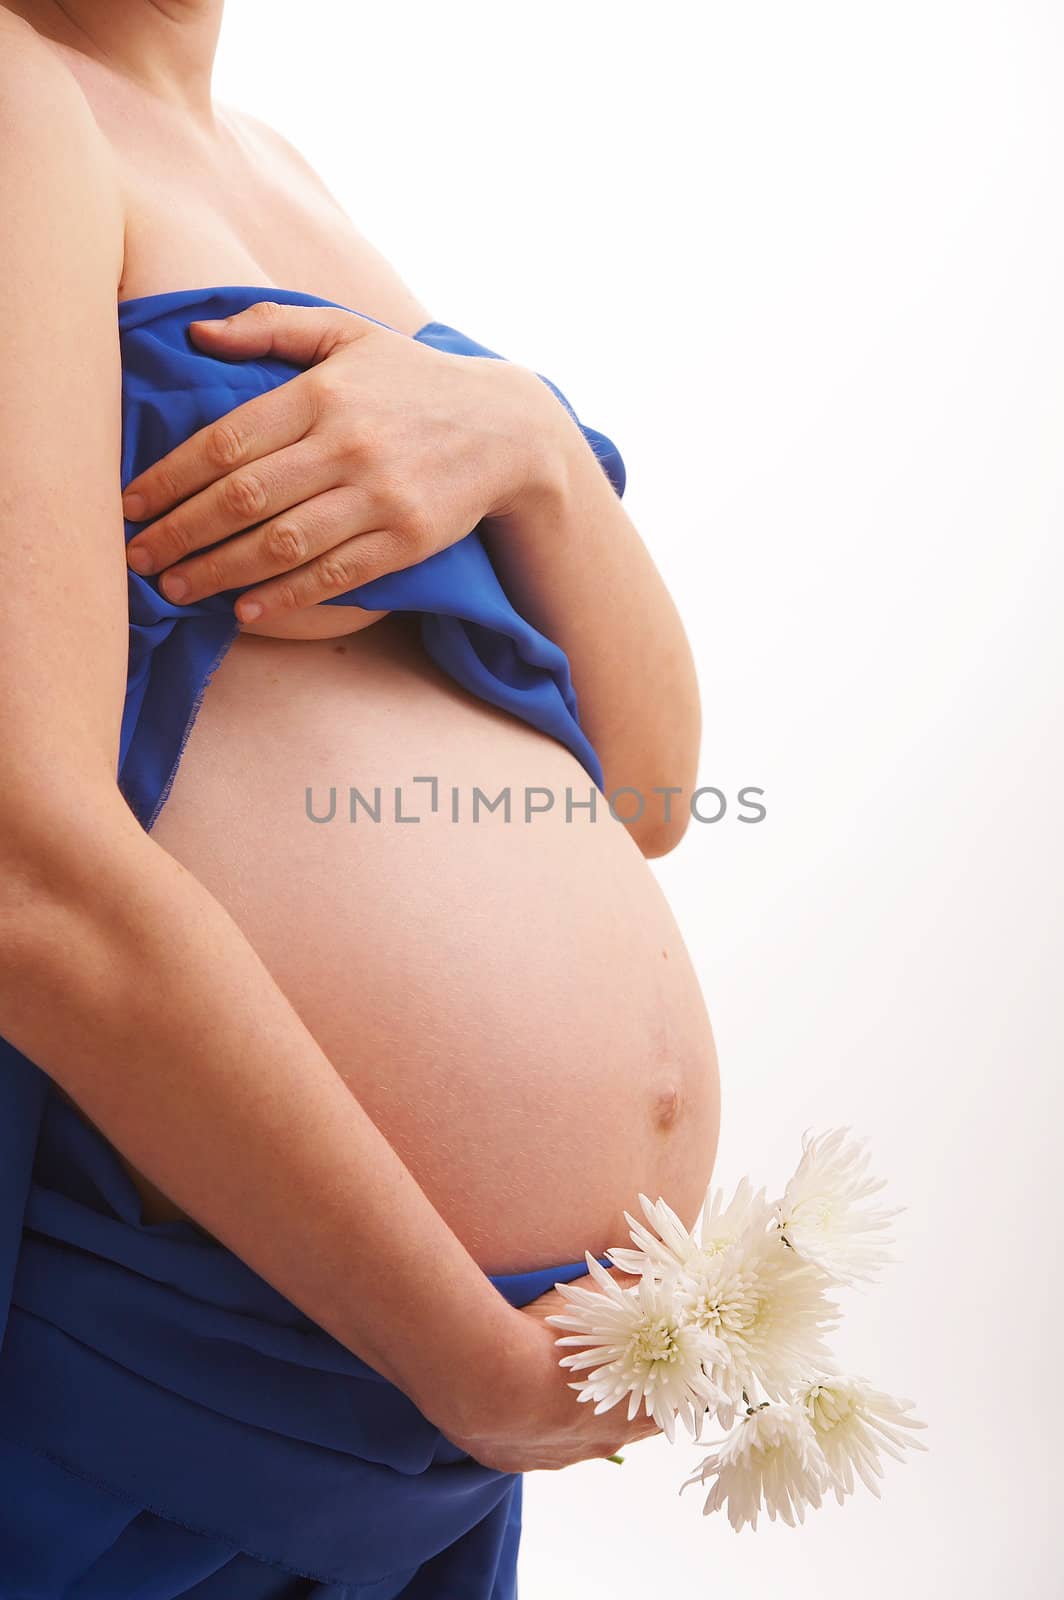 pregnancy woman in the blue drapery with white flower